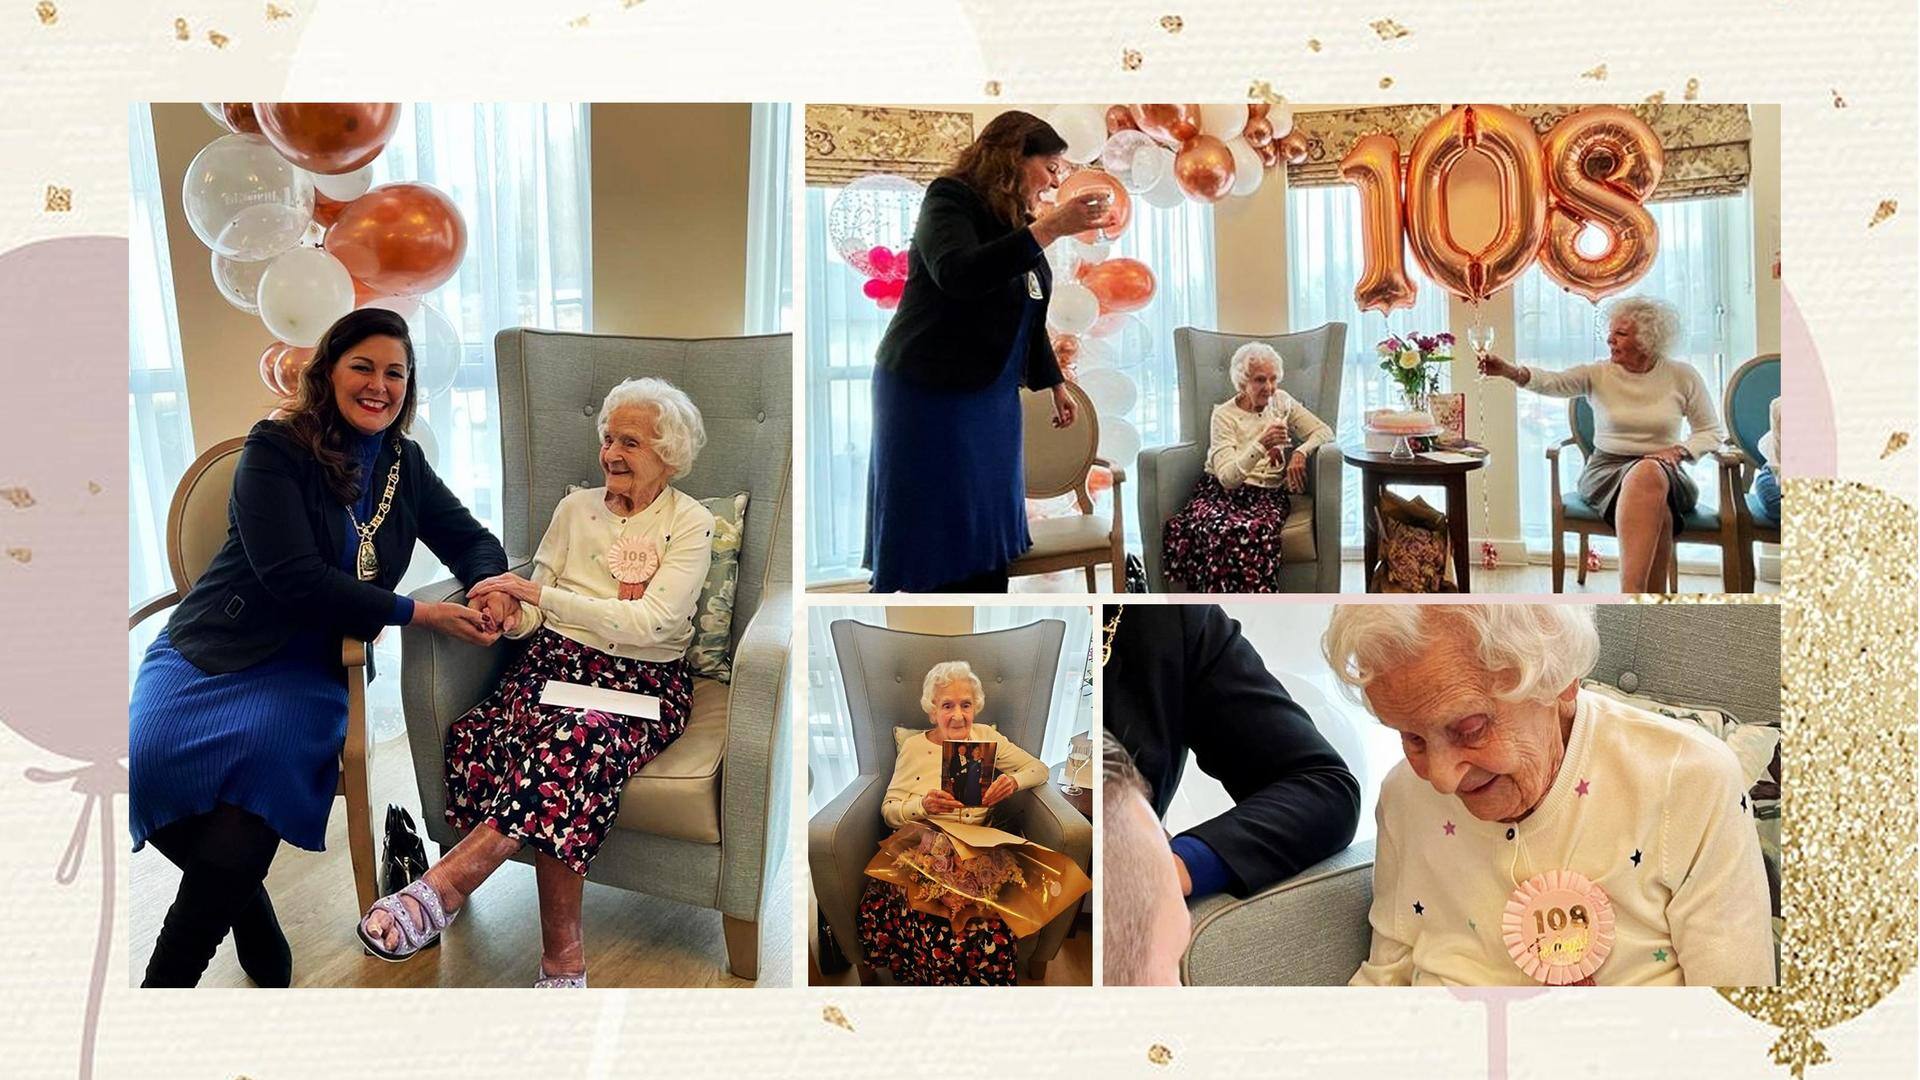 Lunchtime booze is the secret to this 108-year-old woman's longevity